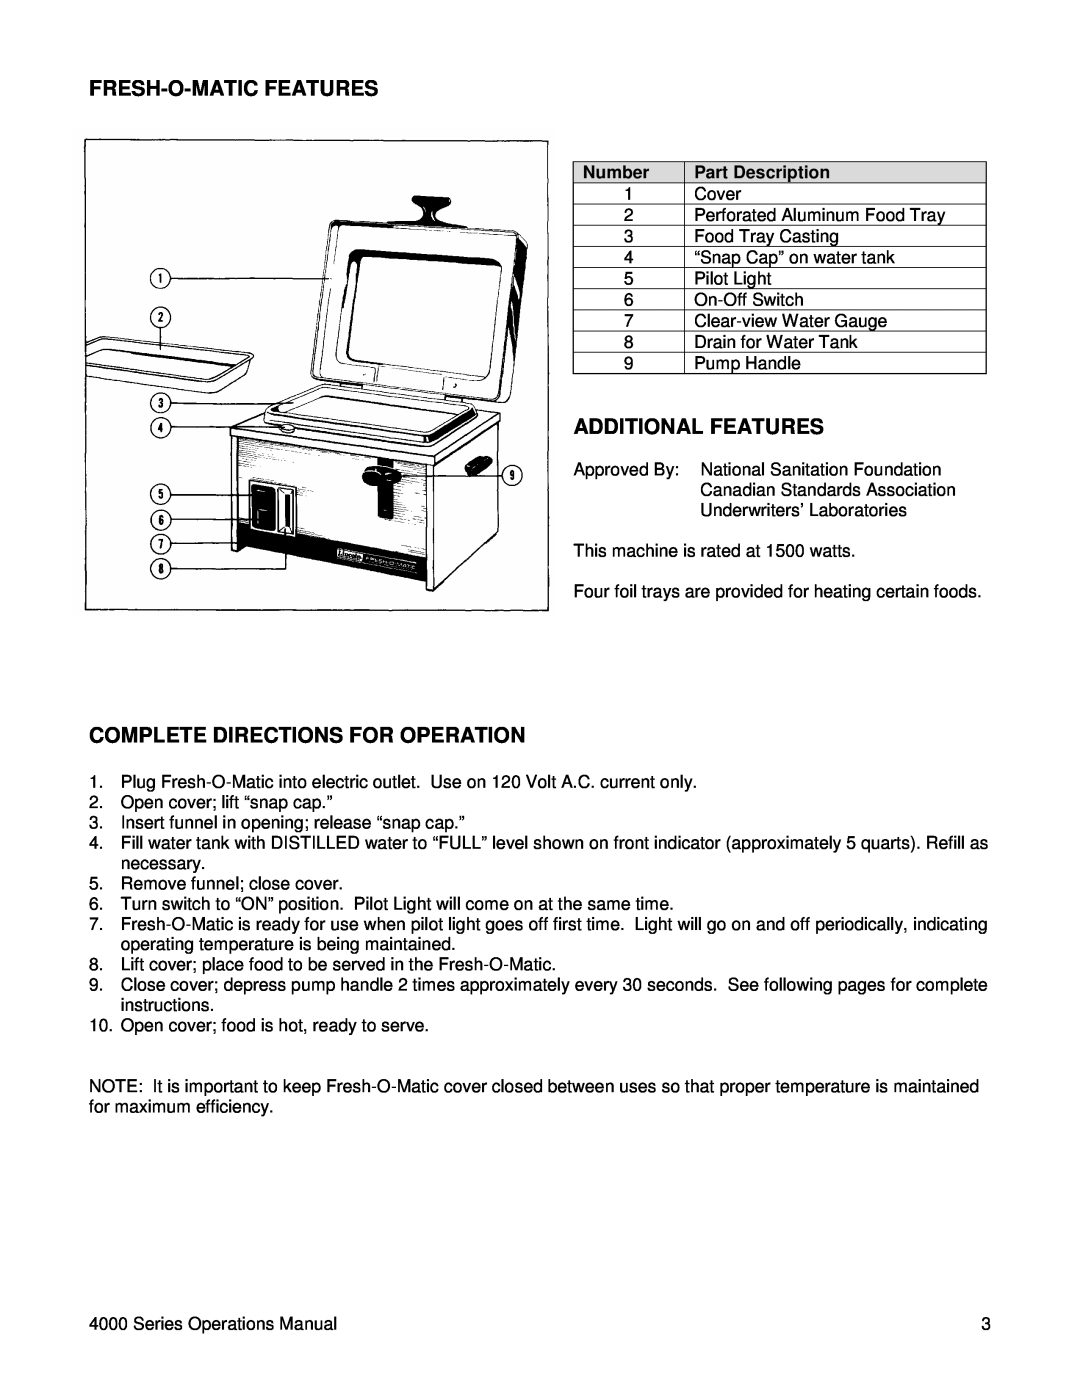 Lincoln MODEL 4000 SERIES manual Fresh-O-Maticfeatures, Additional Features, Complete Directions For Operation, Number 